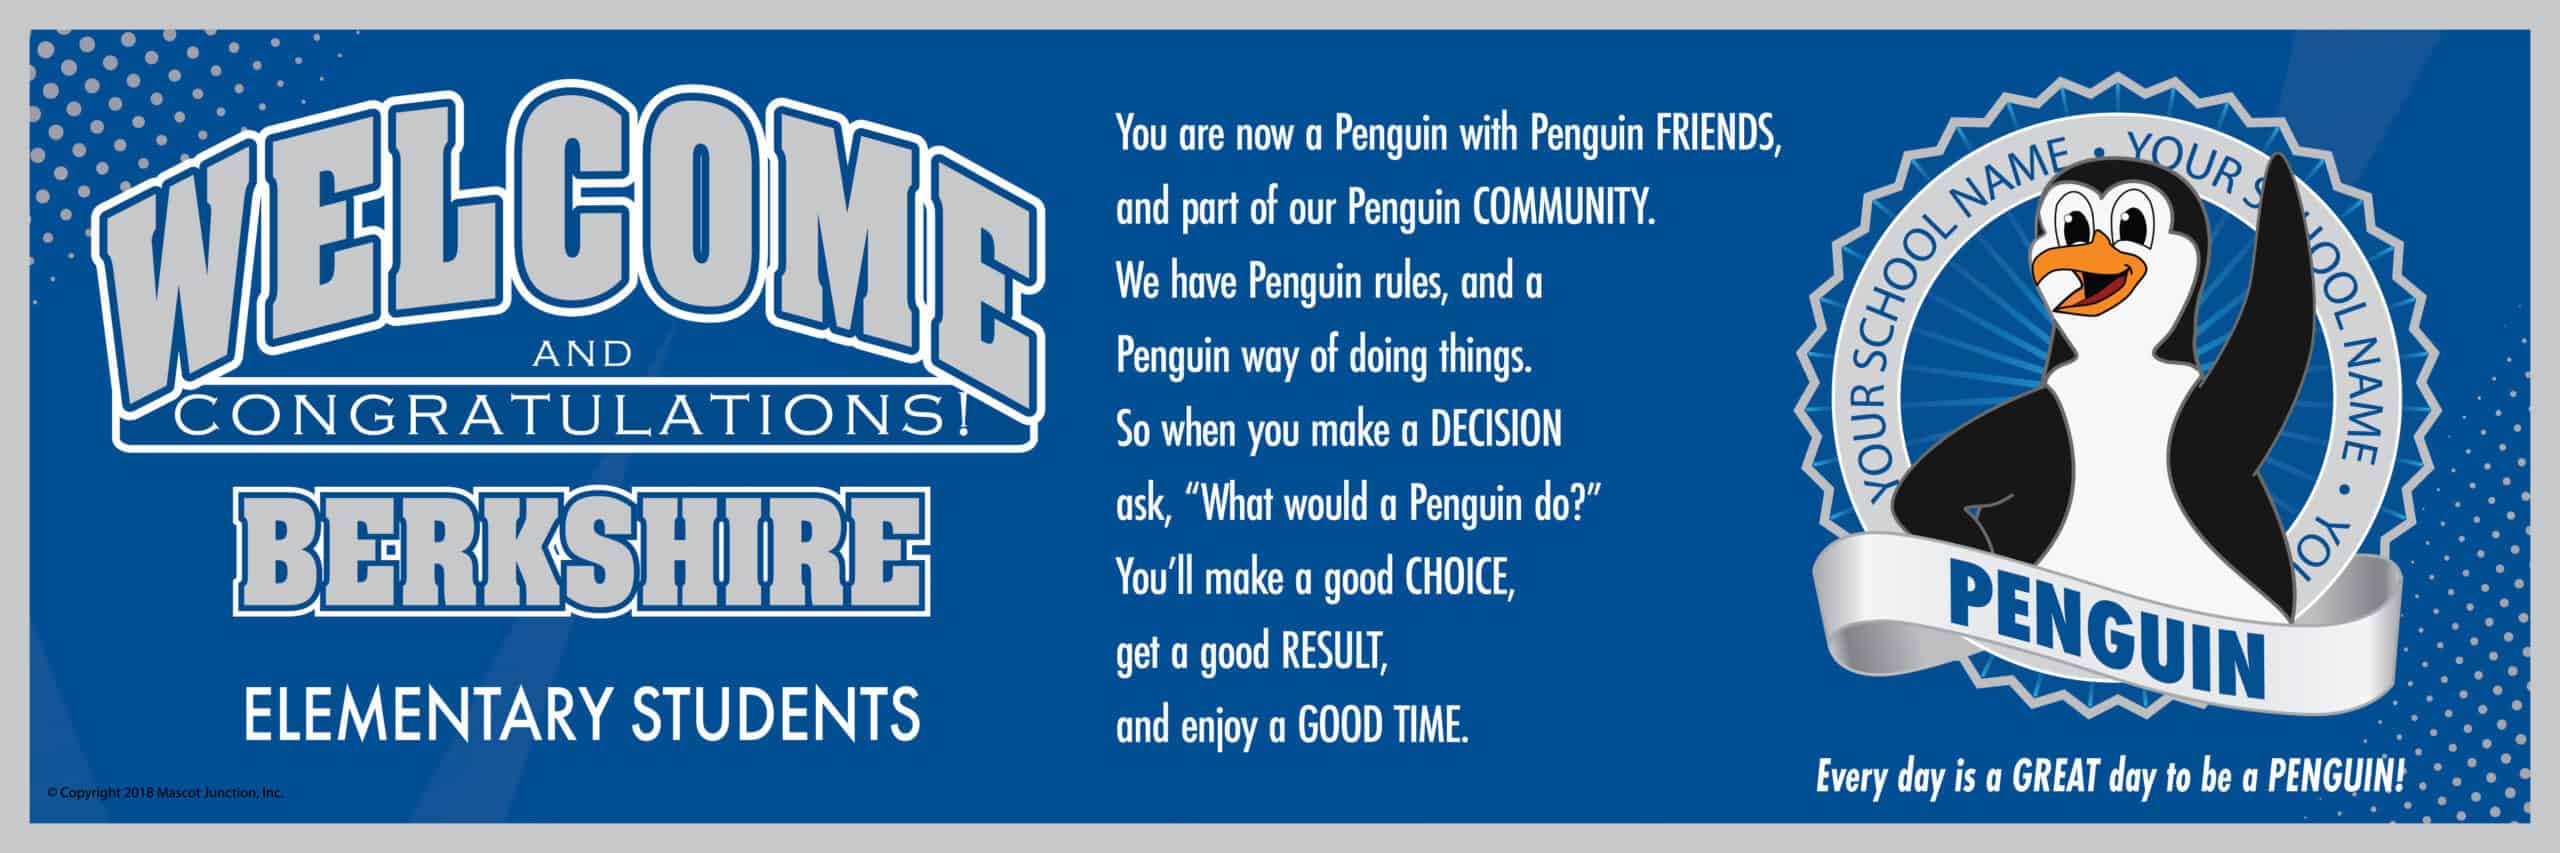 Welcome-Banner-Penguin